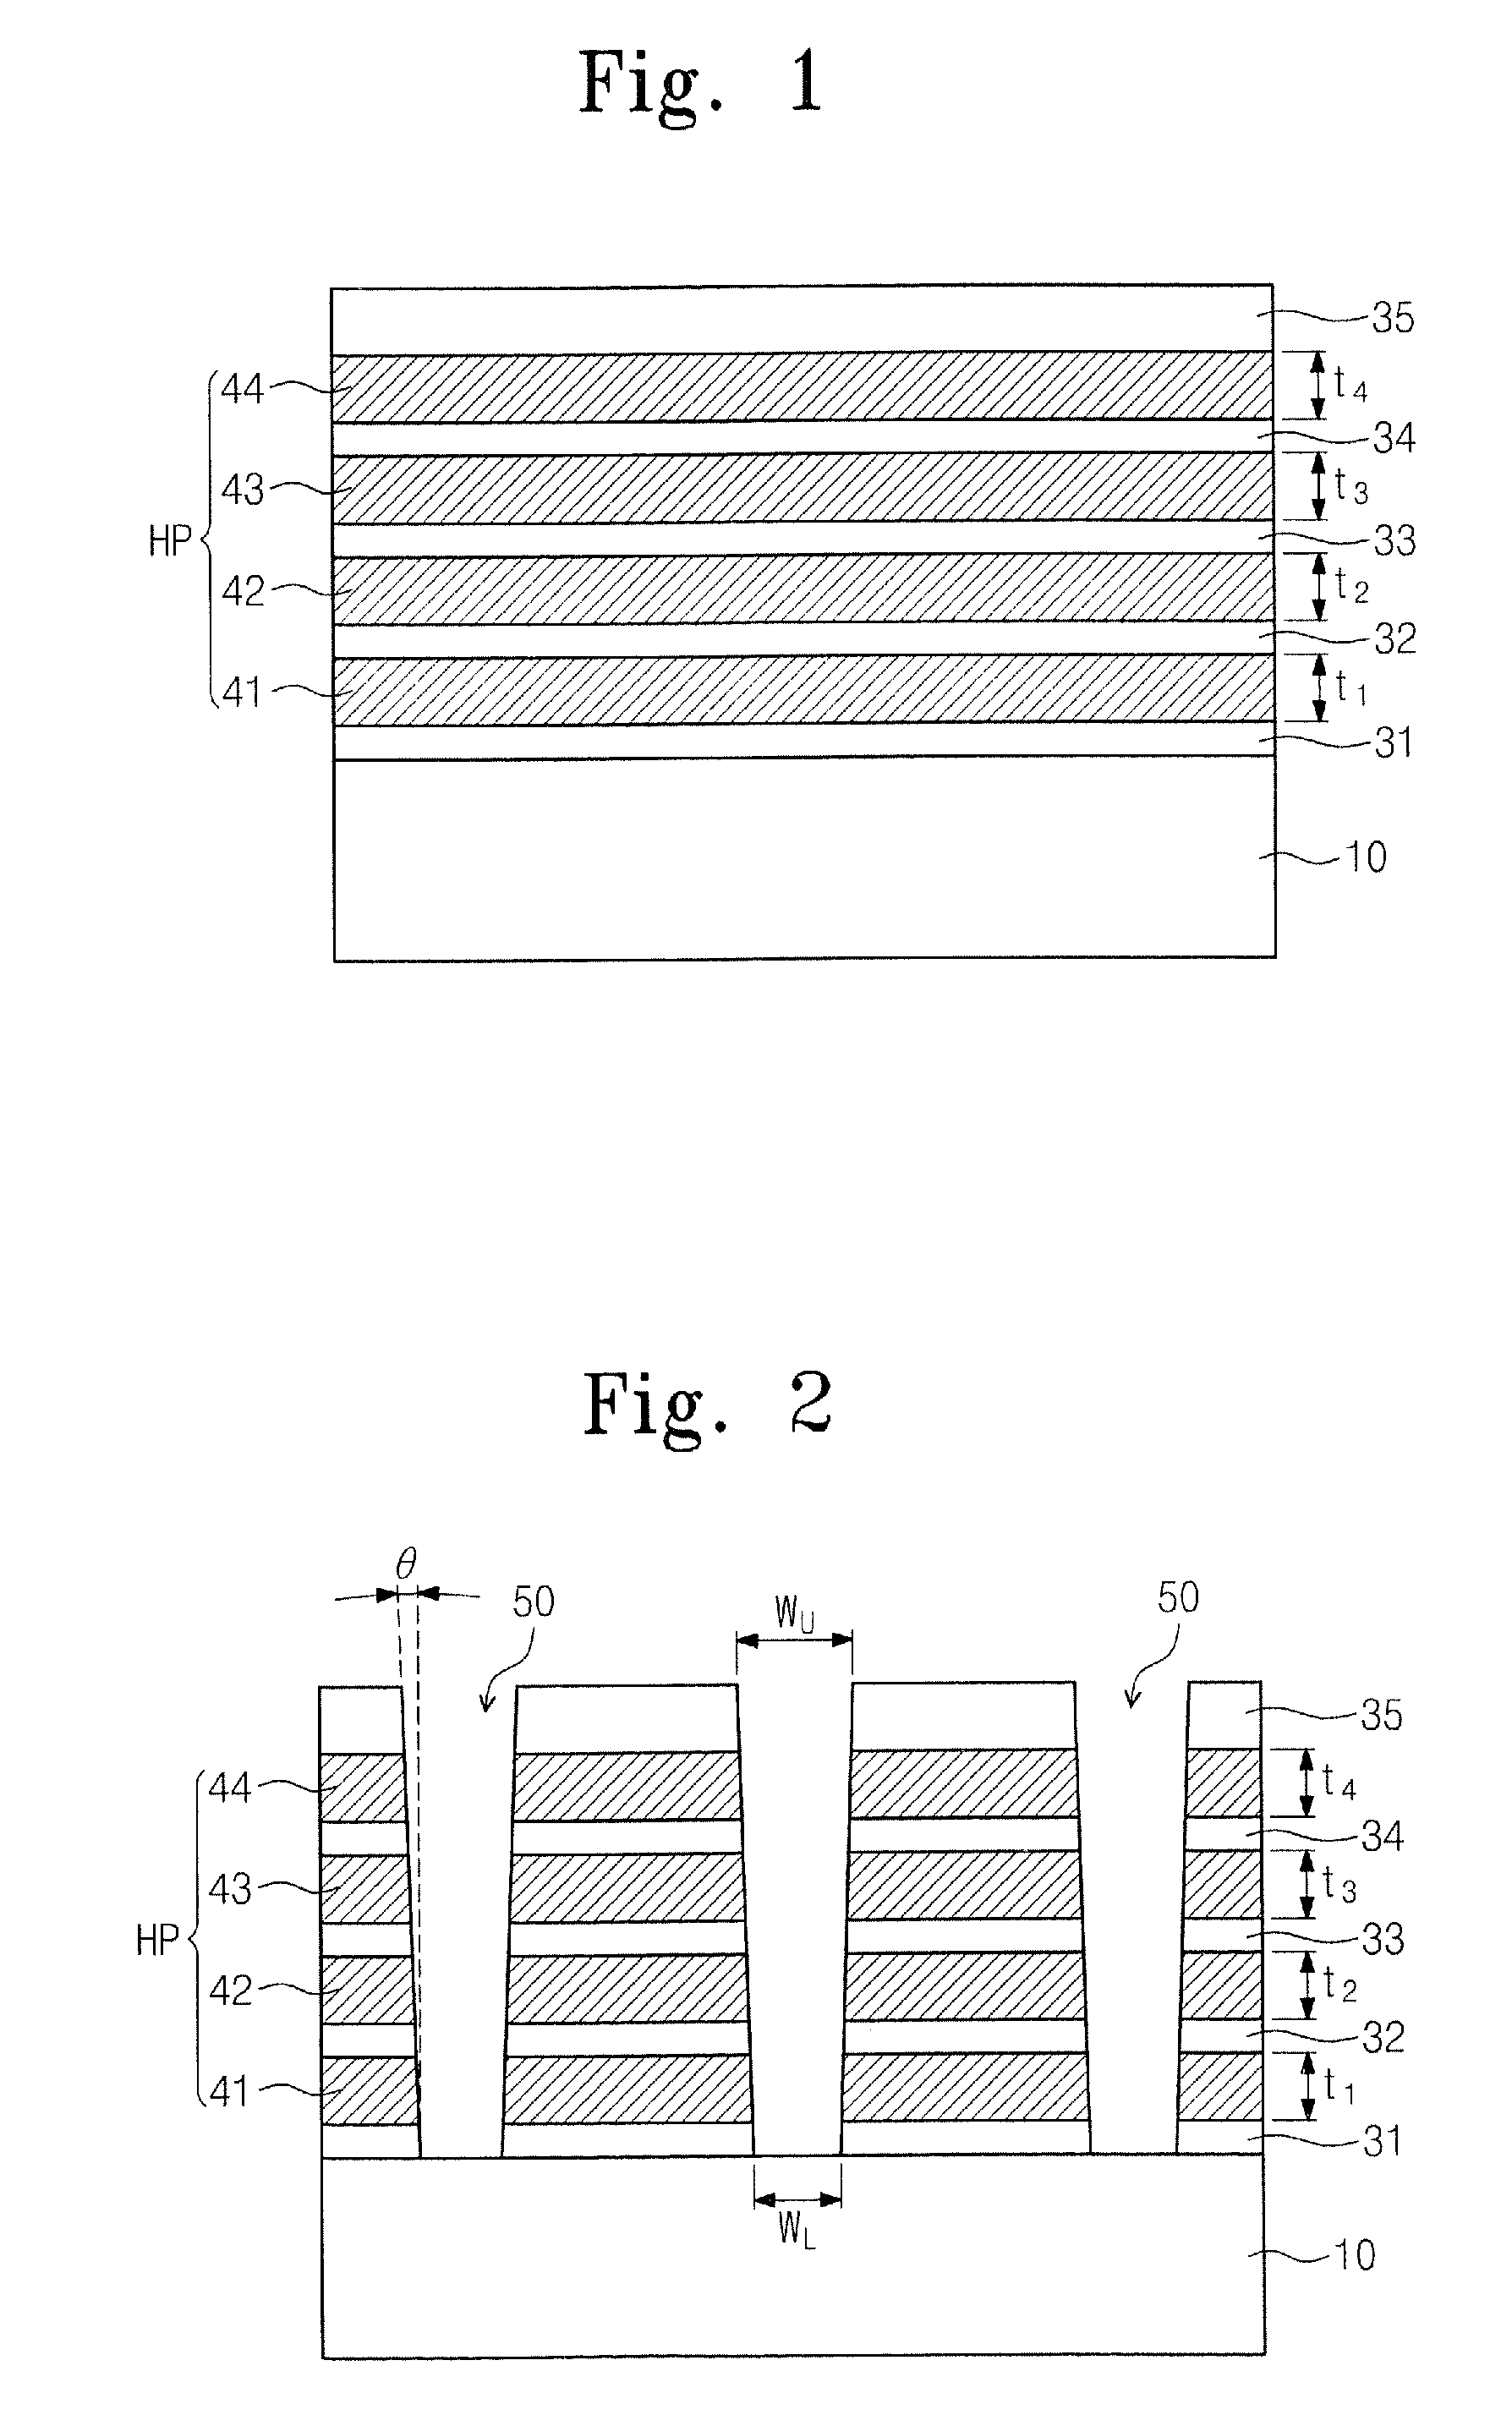 Three-dimensional microelectronic devices including repeating layer patterns of different thicknesses